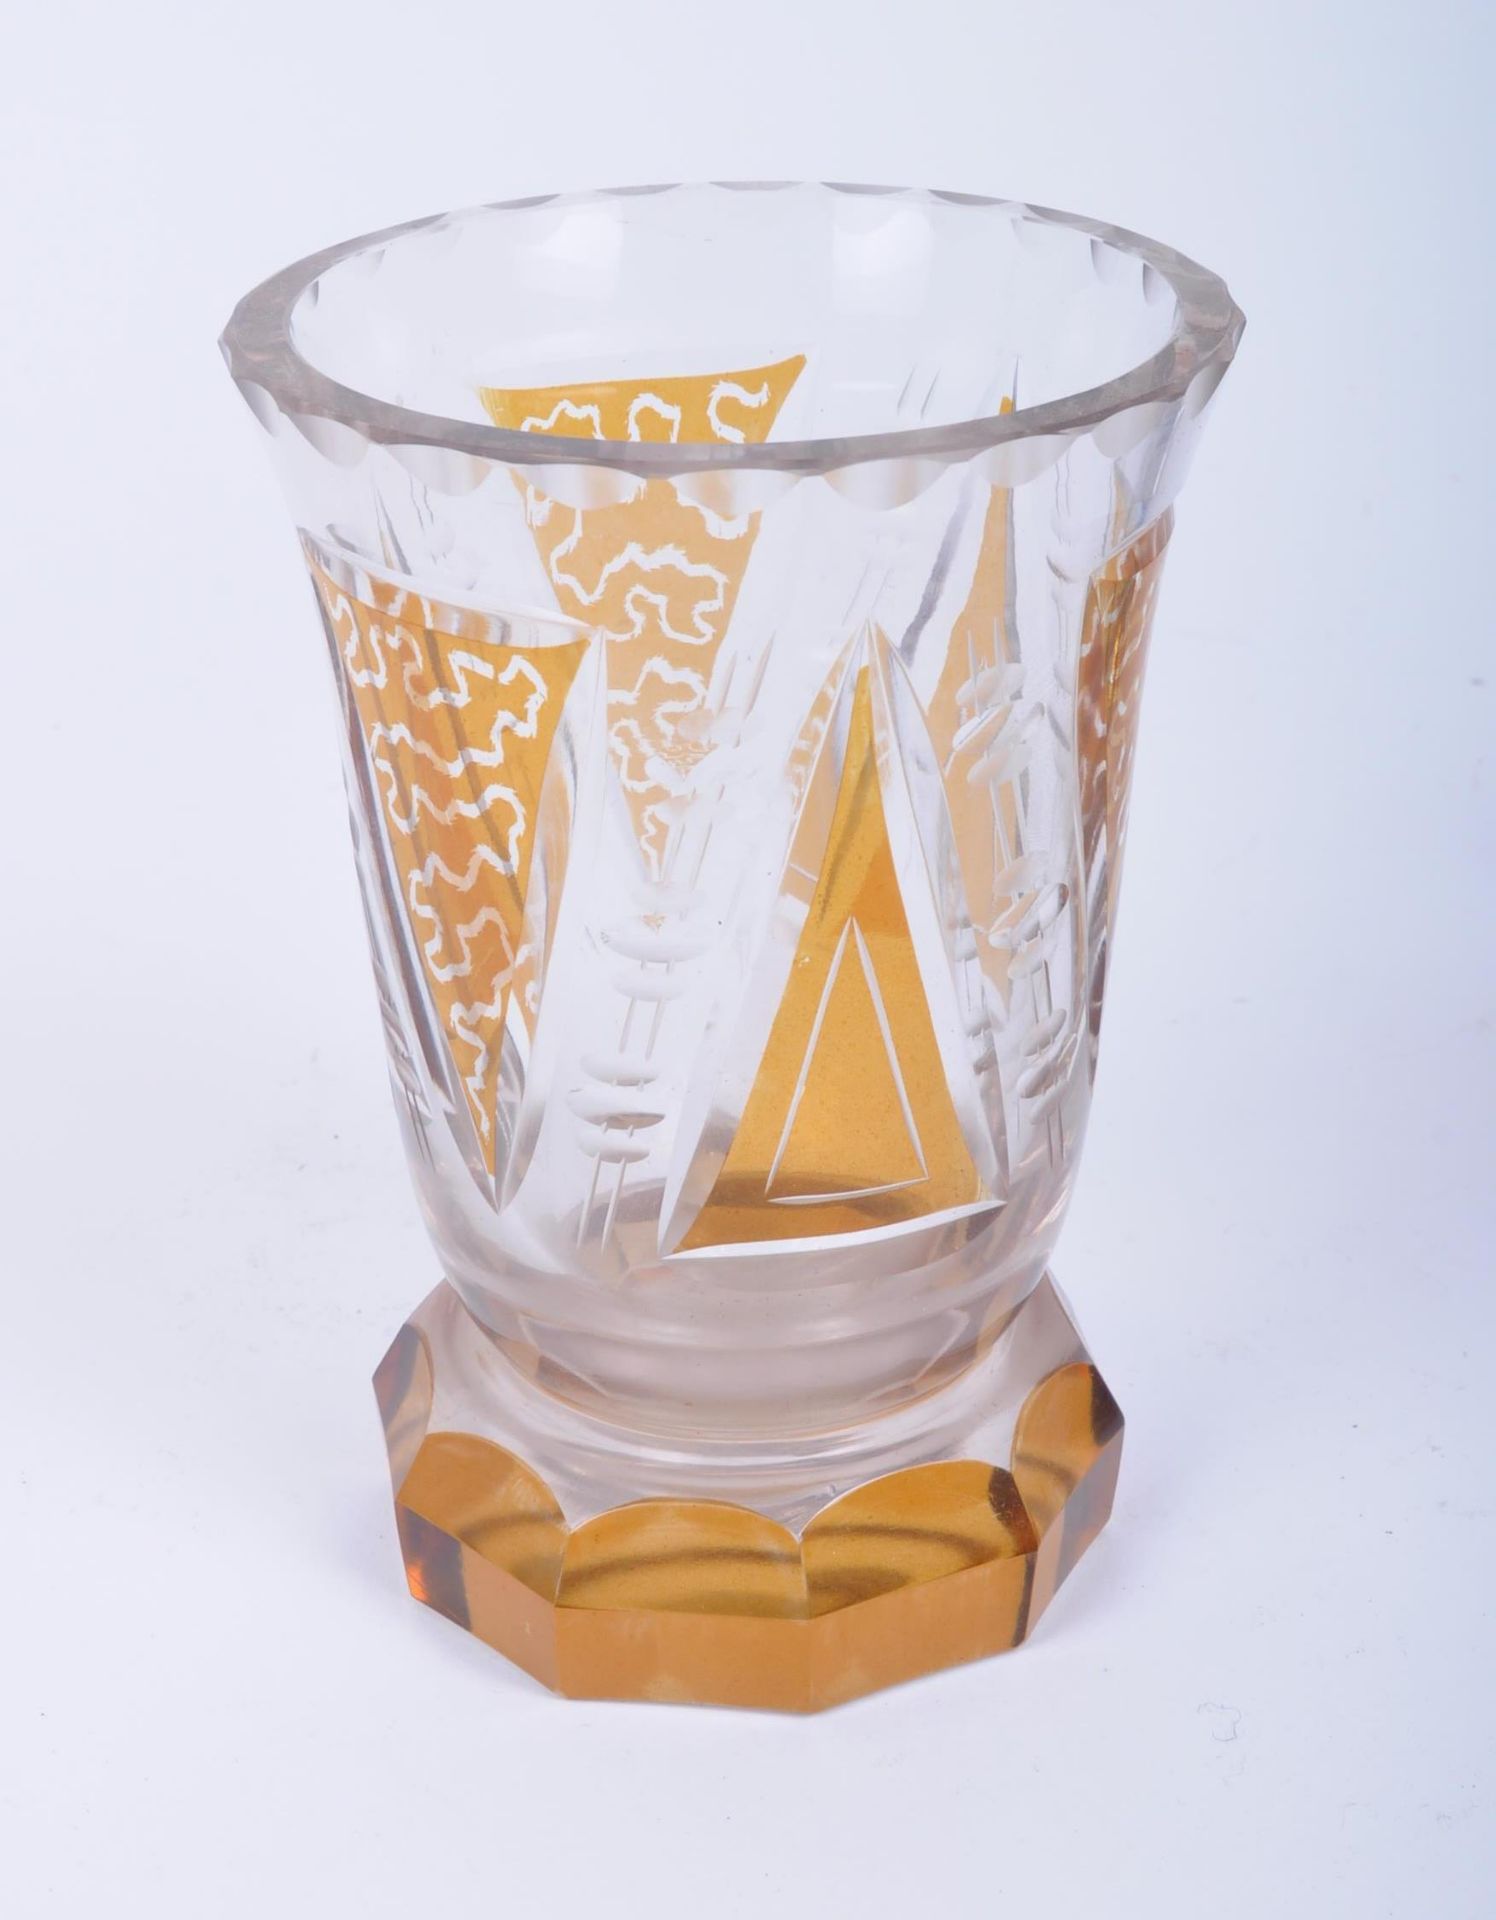 COLLECTION OF CZECH GLASS MOSER MANNER WINE GOBLETS - Image 5 of 6